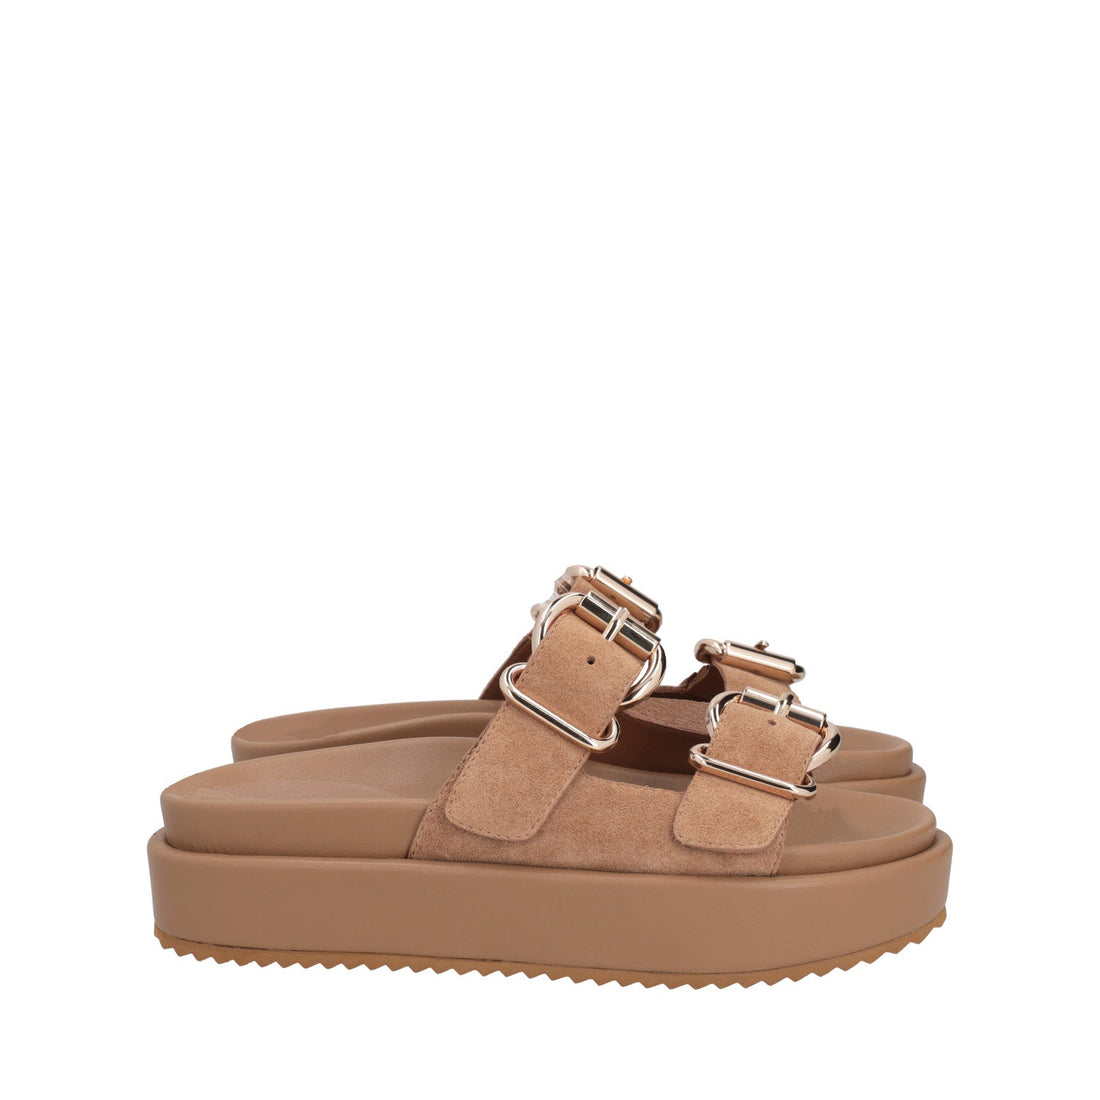 TAN MARGARET SLIPPERS IN SUEDE LEATHER